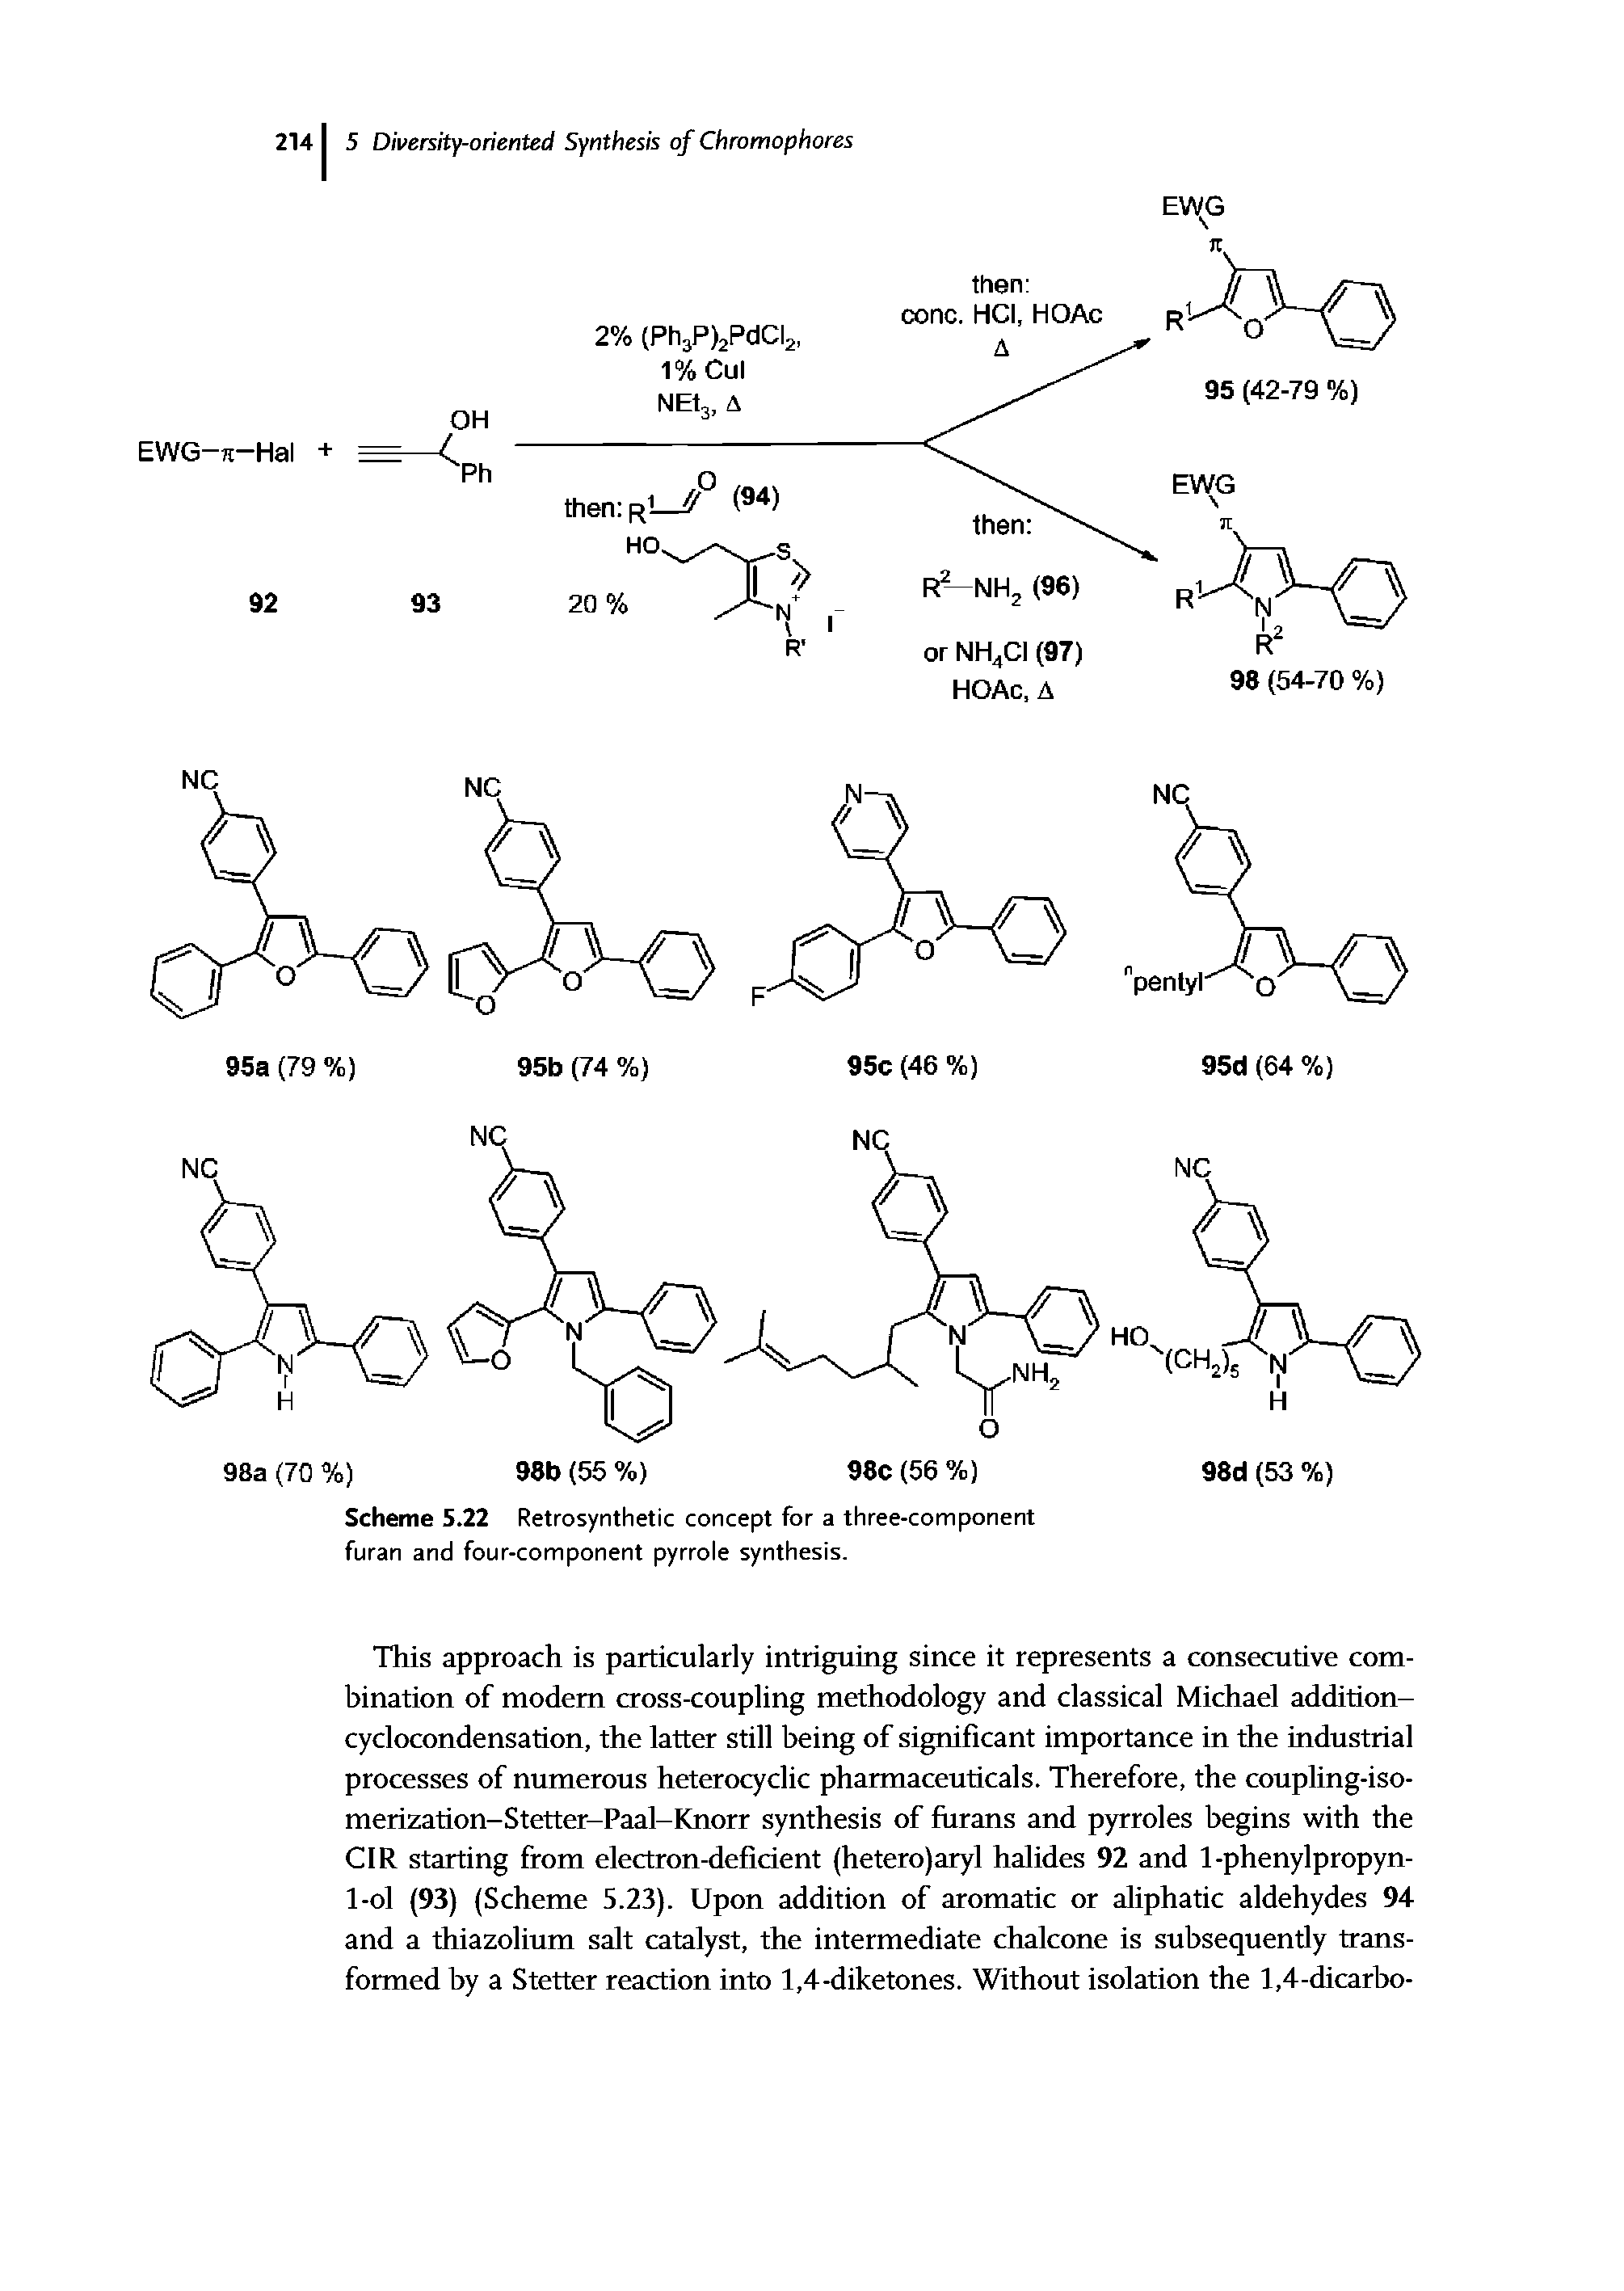 Scheme 5.22 Retrosynthetic concept for a three-component furan and four-component pyrrole synthesis.